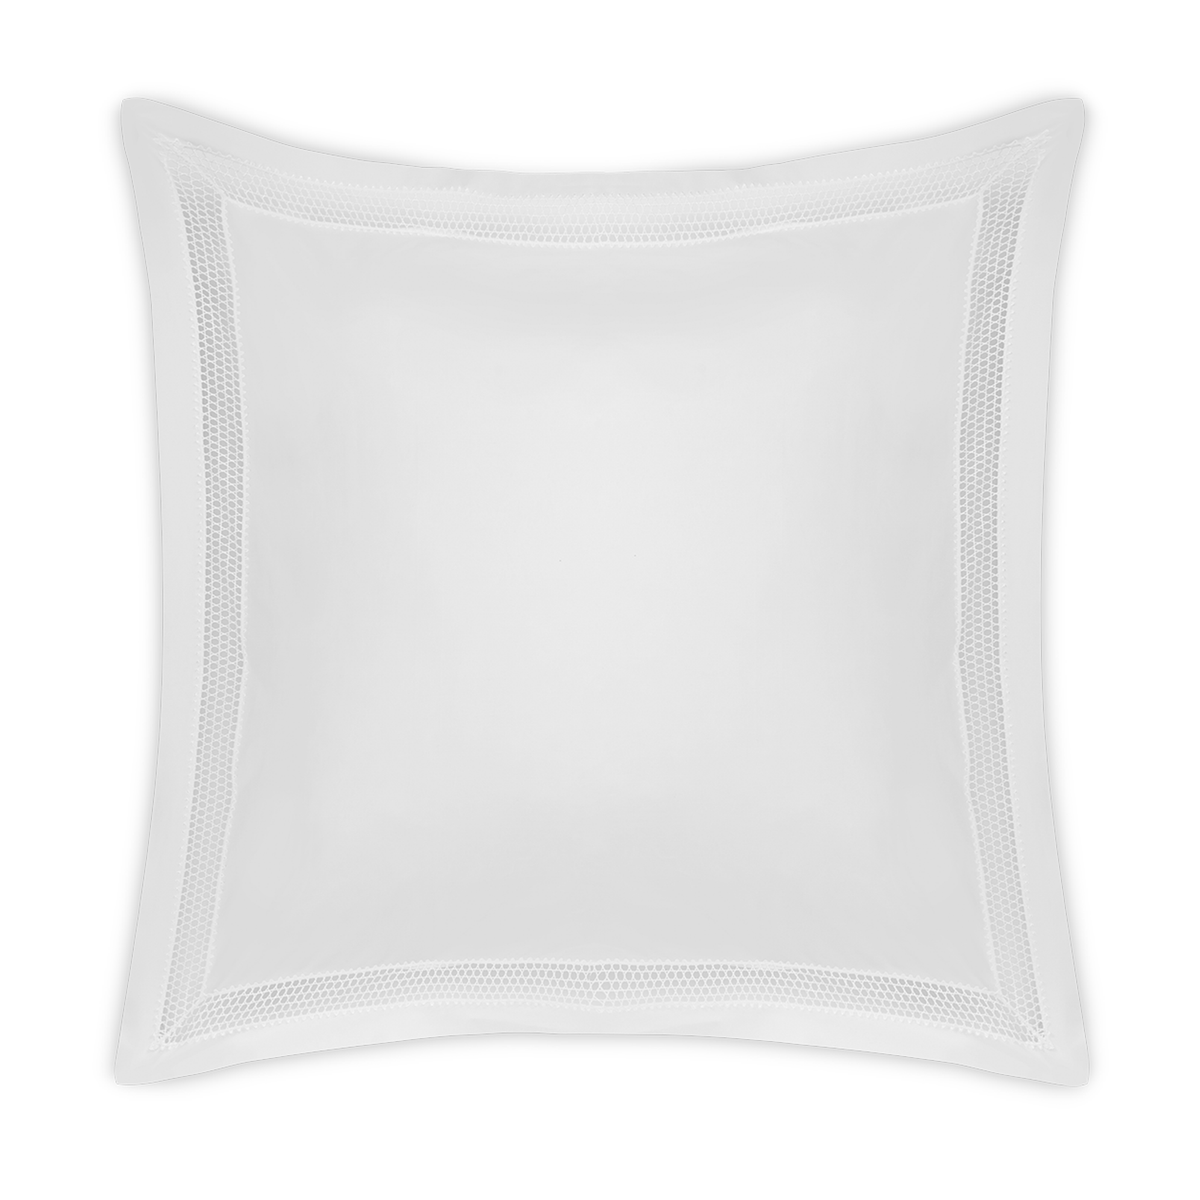 Clear Image of Matouk Cecily Euro Sham in White Color